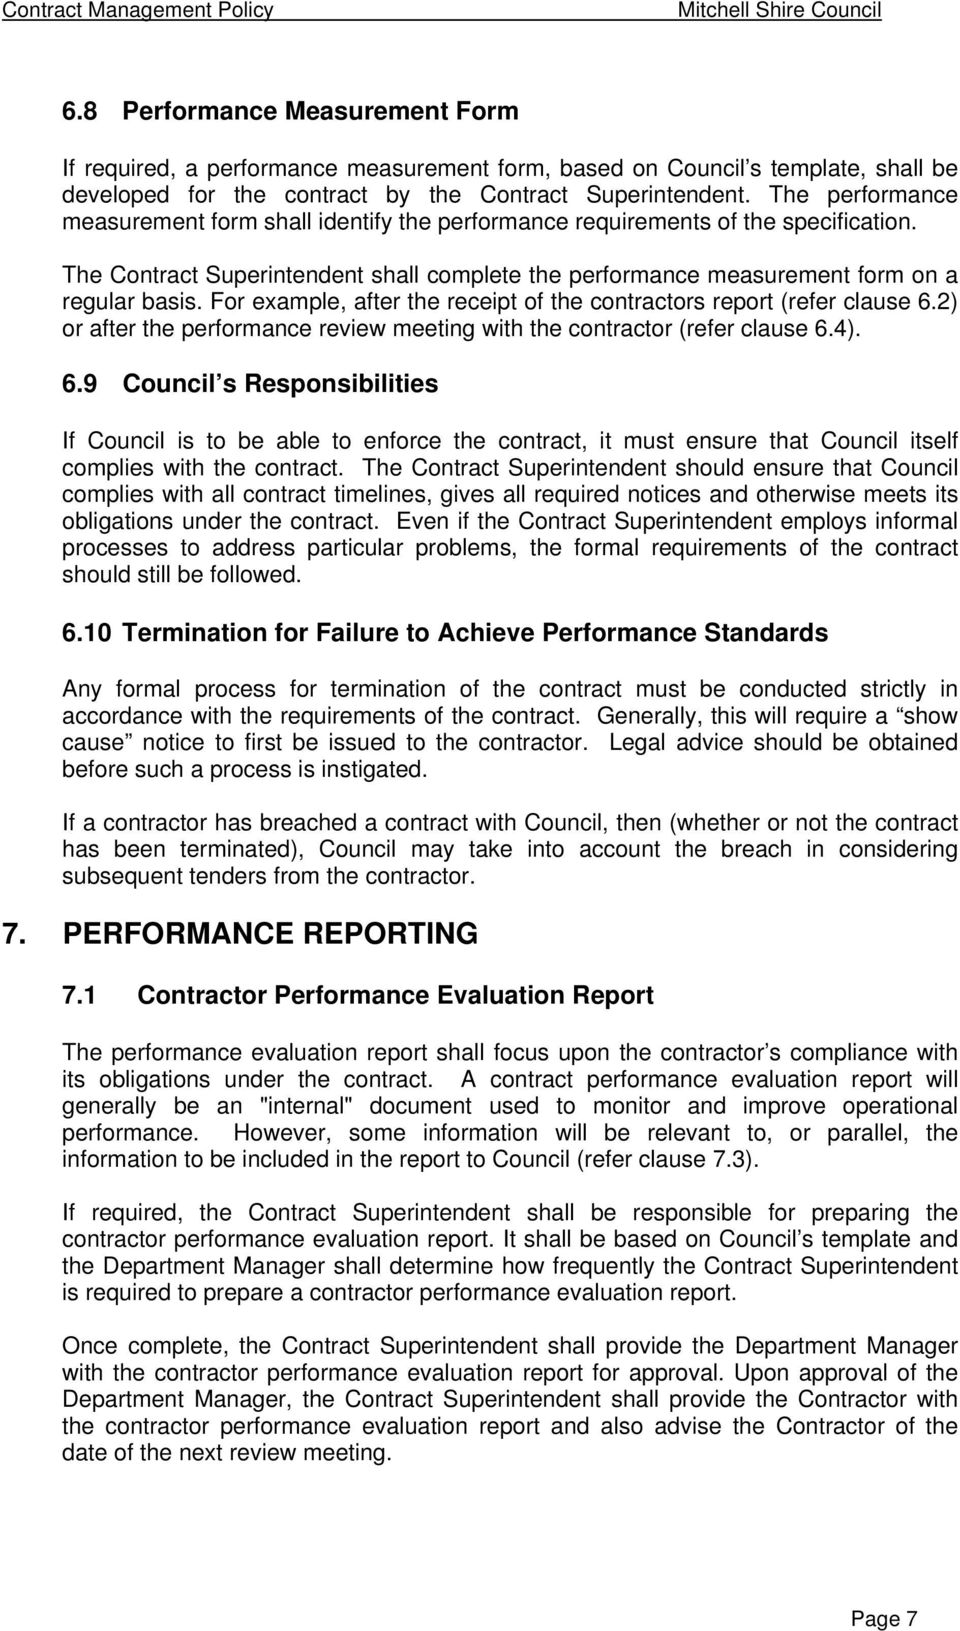 The performance measurement form shall identify the performance requirements of the specification. The Contract Superintendent shall complete the performance measurement form on a regular basis.